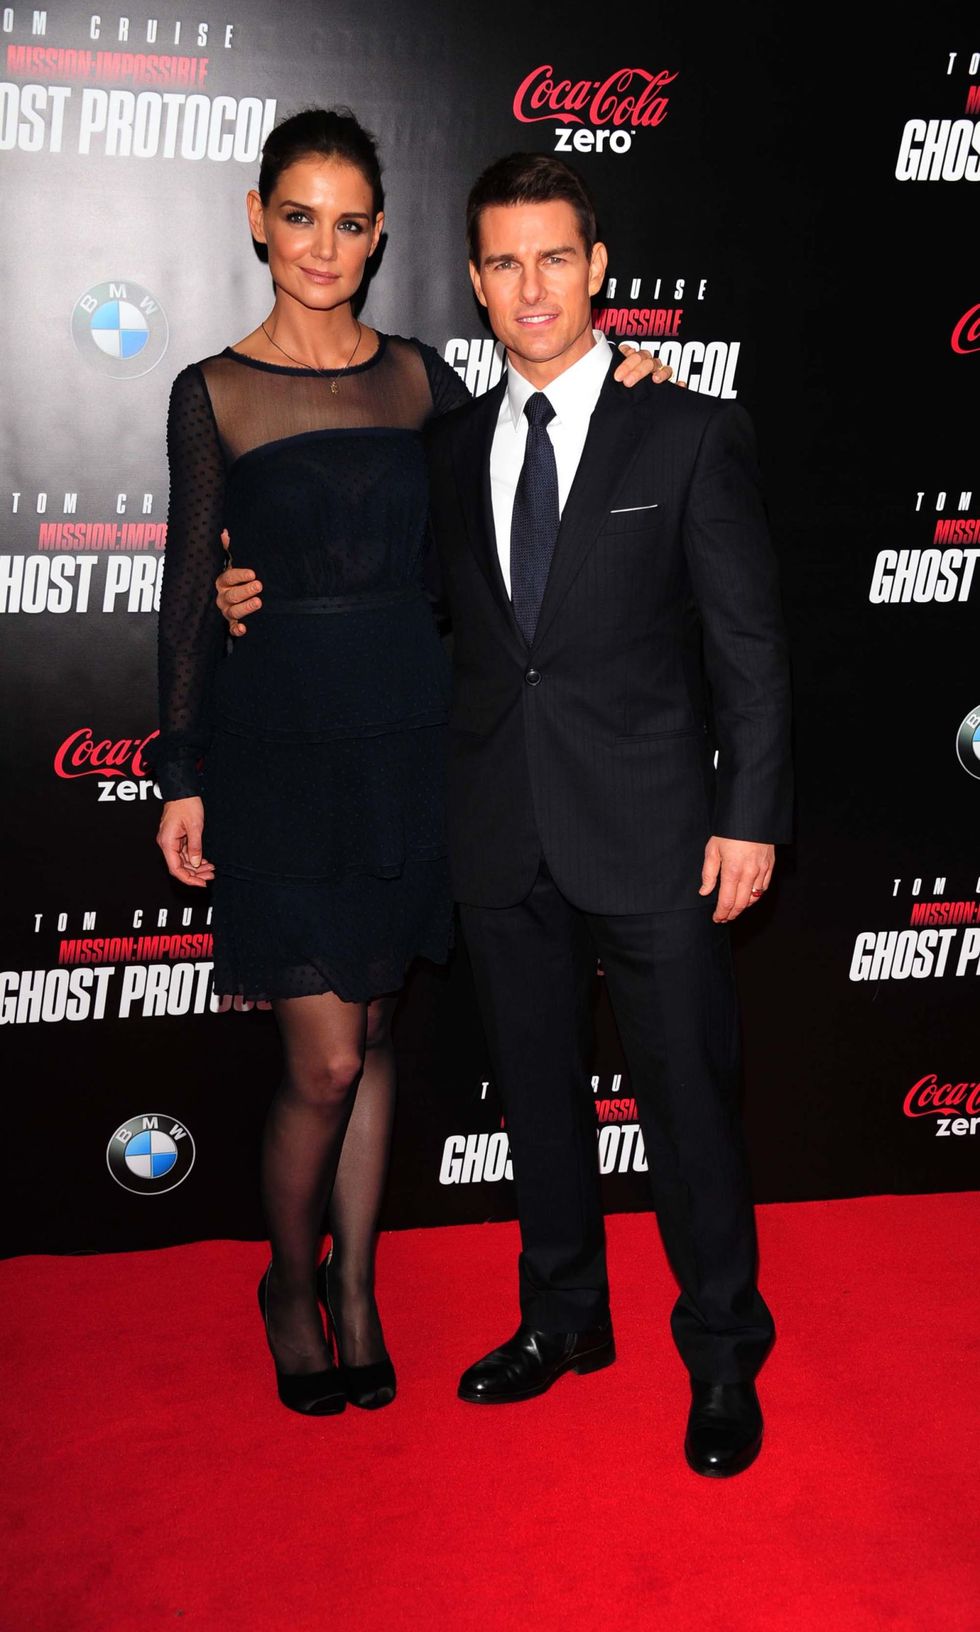 Actors Tom Cruise and Katie Holmes at the "Mission Impossible: Ghost Protocol" Premiere in New York&#xA;19/12/2011